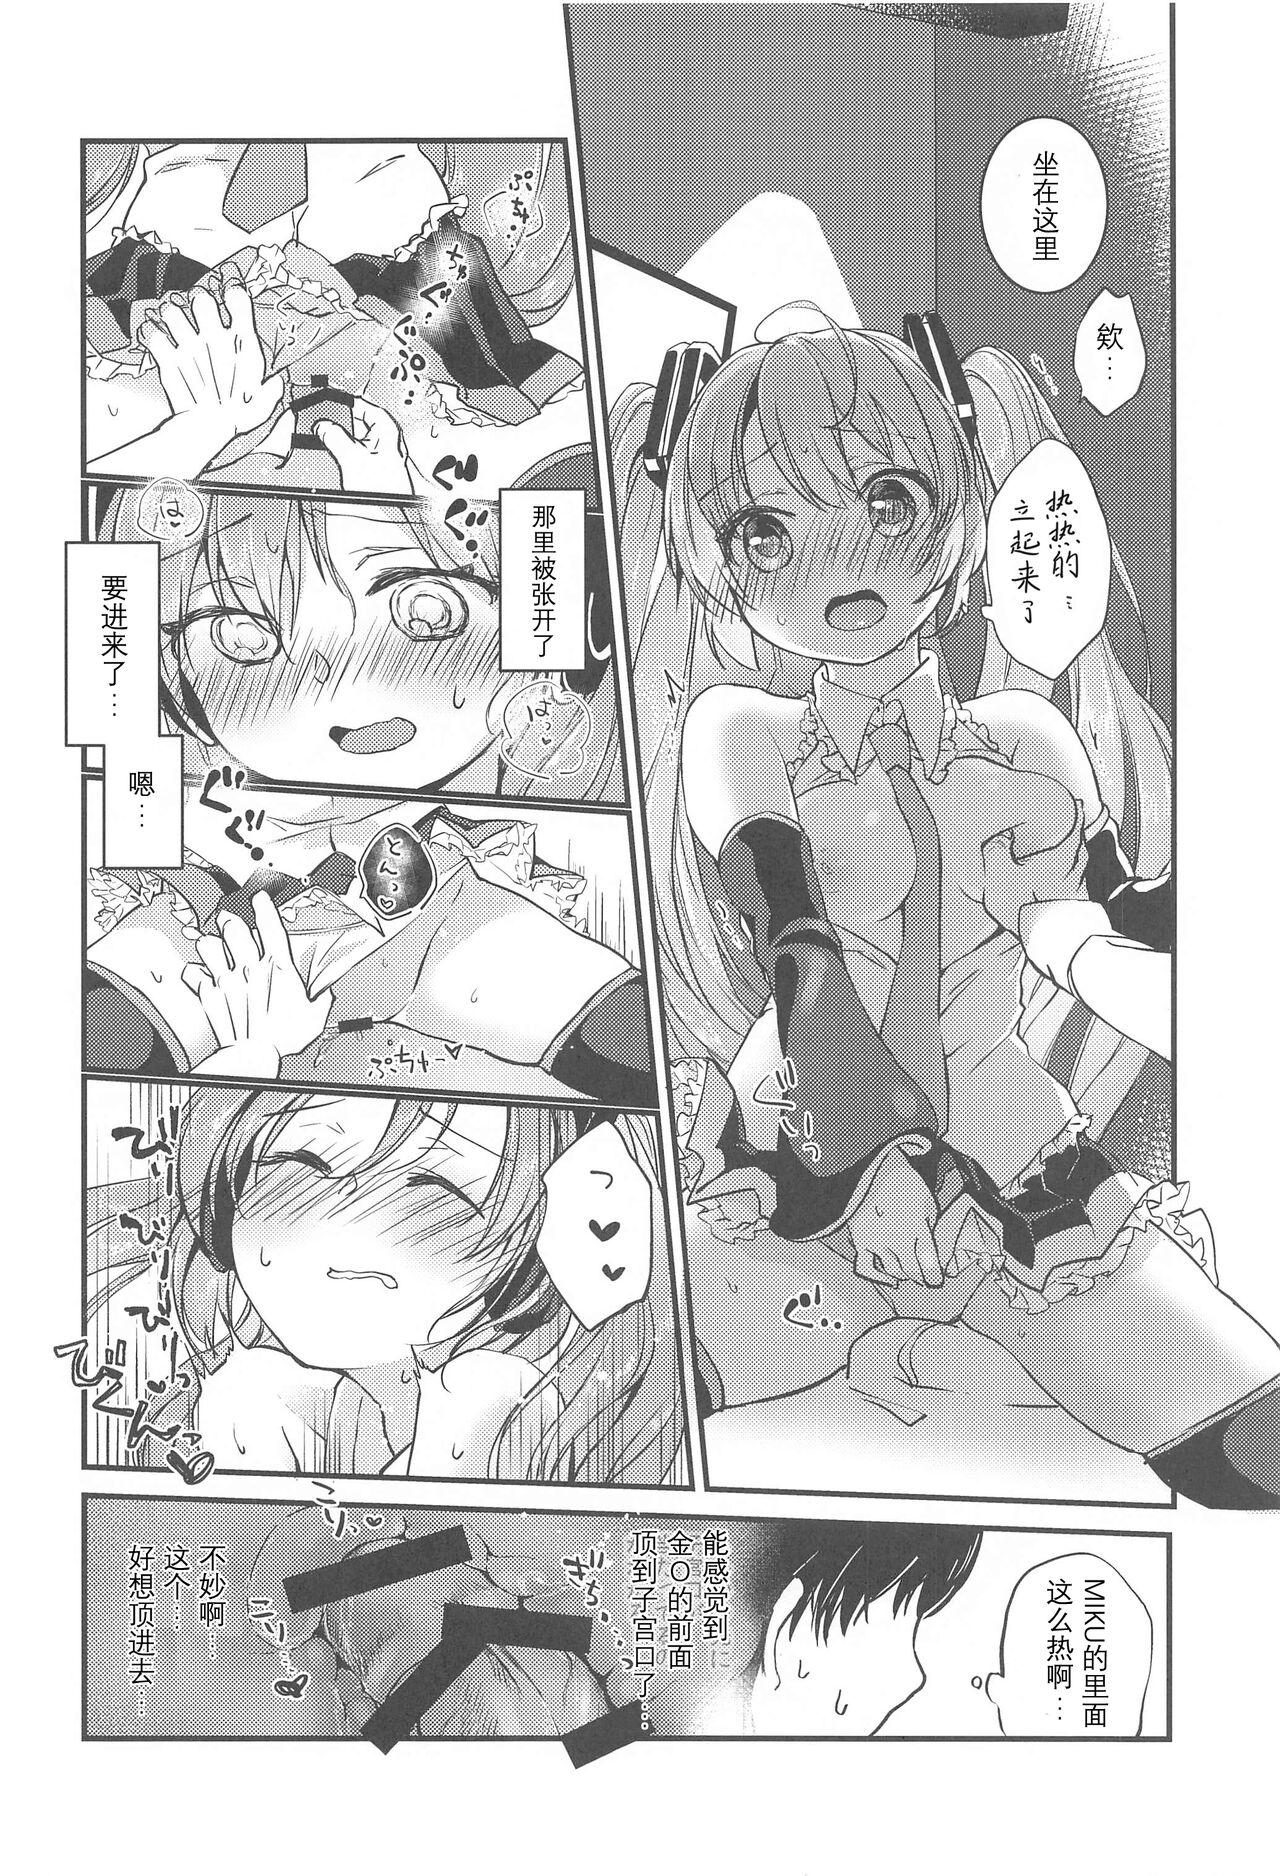 Unshaved room309 - Vocaloid Love Making - Page 8